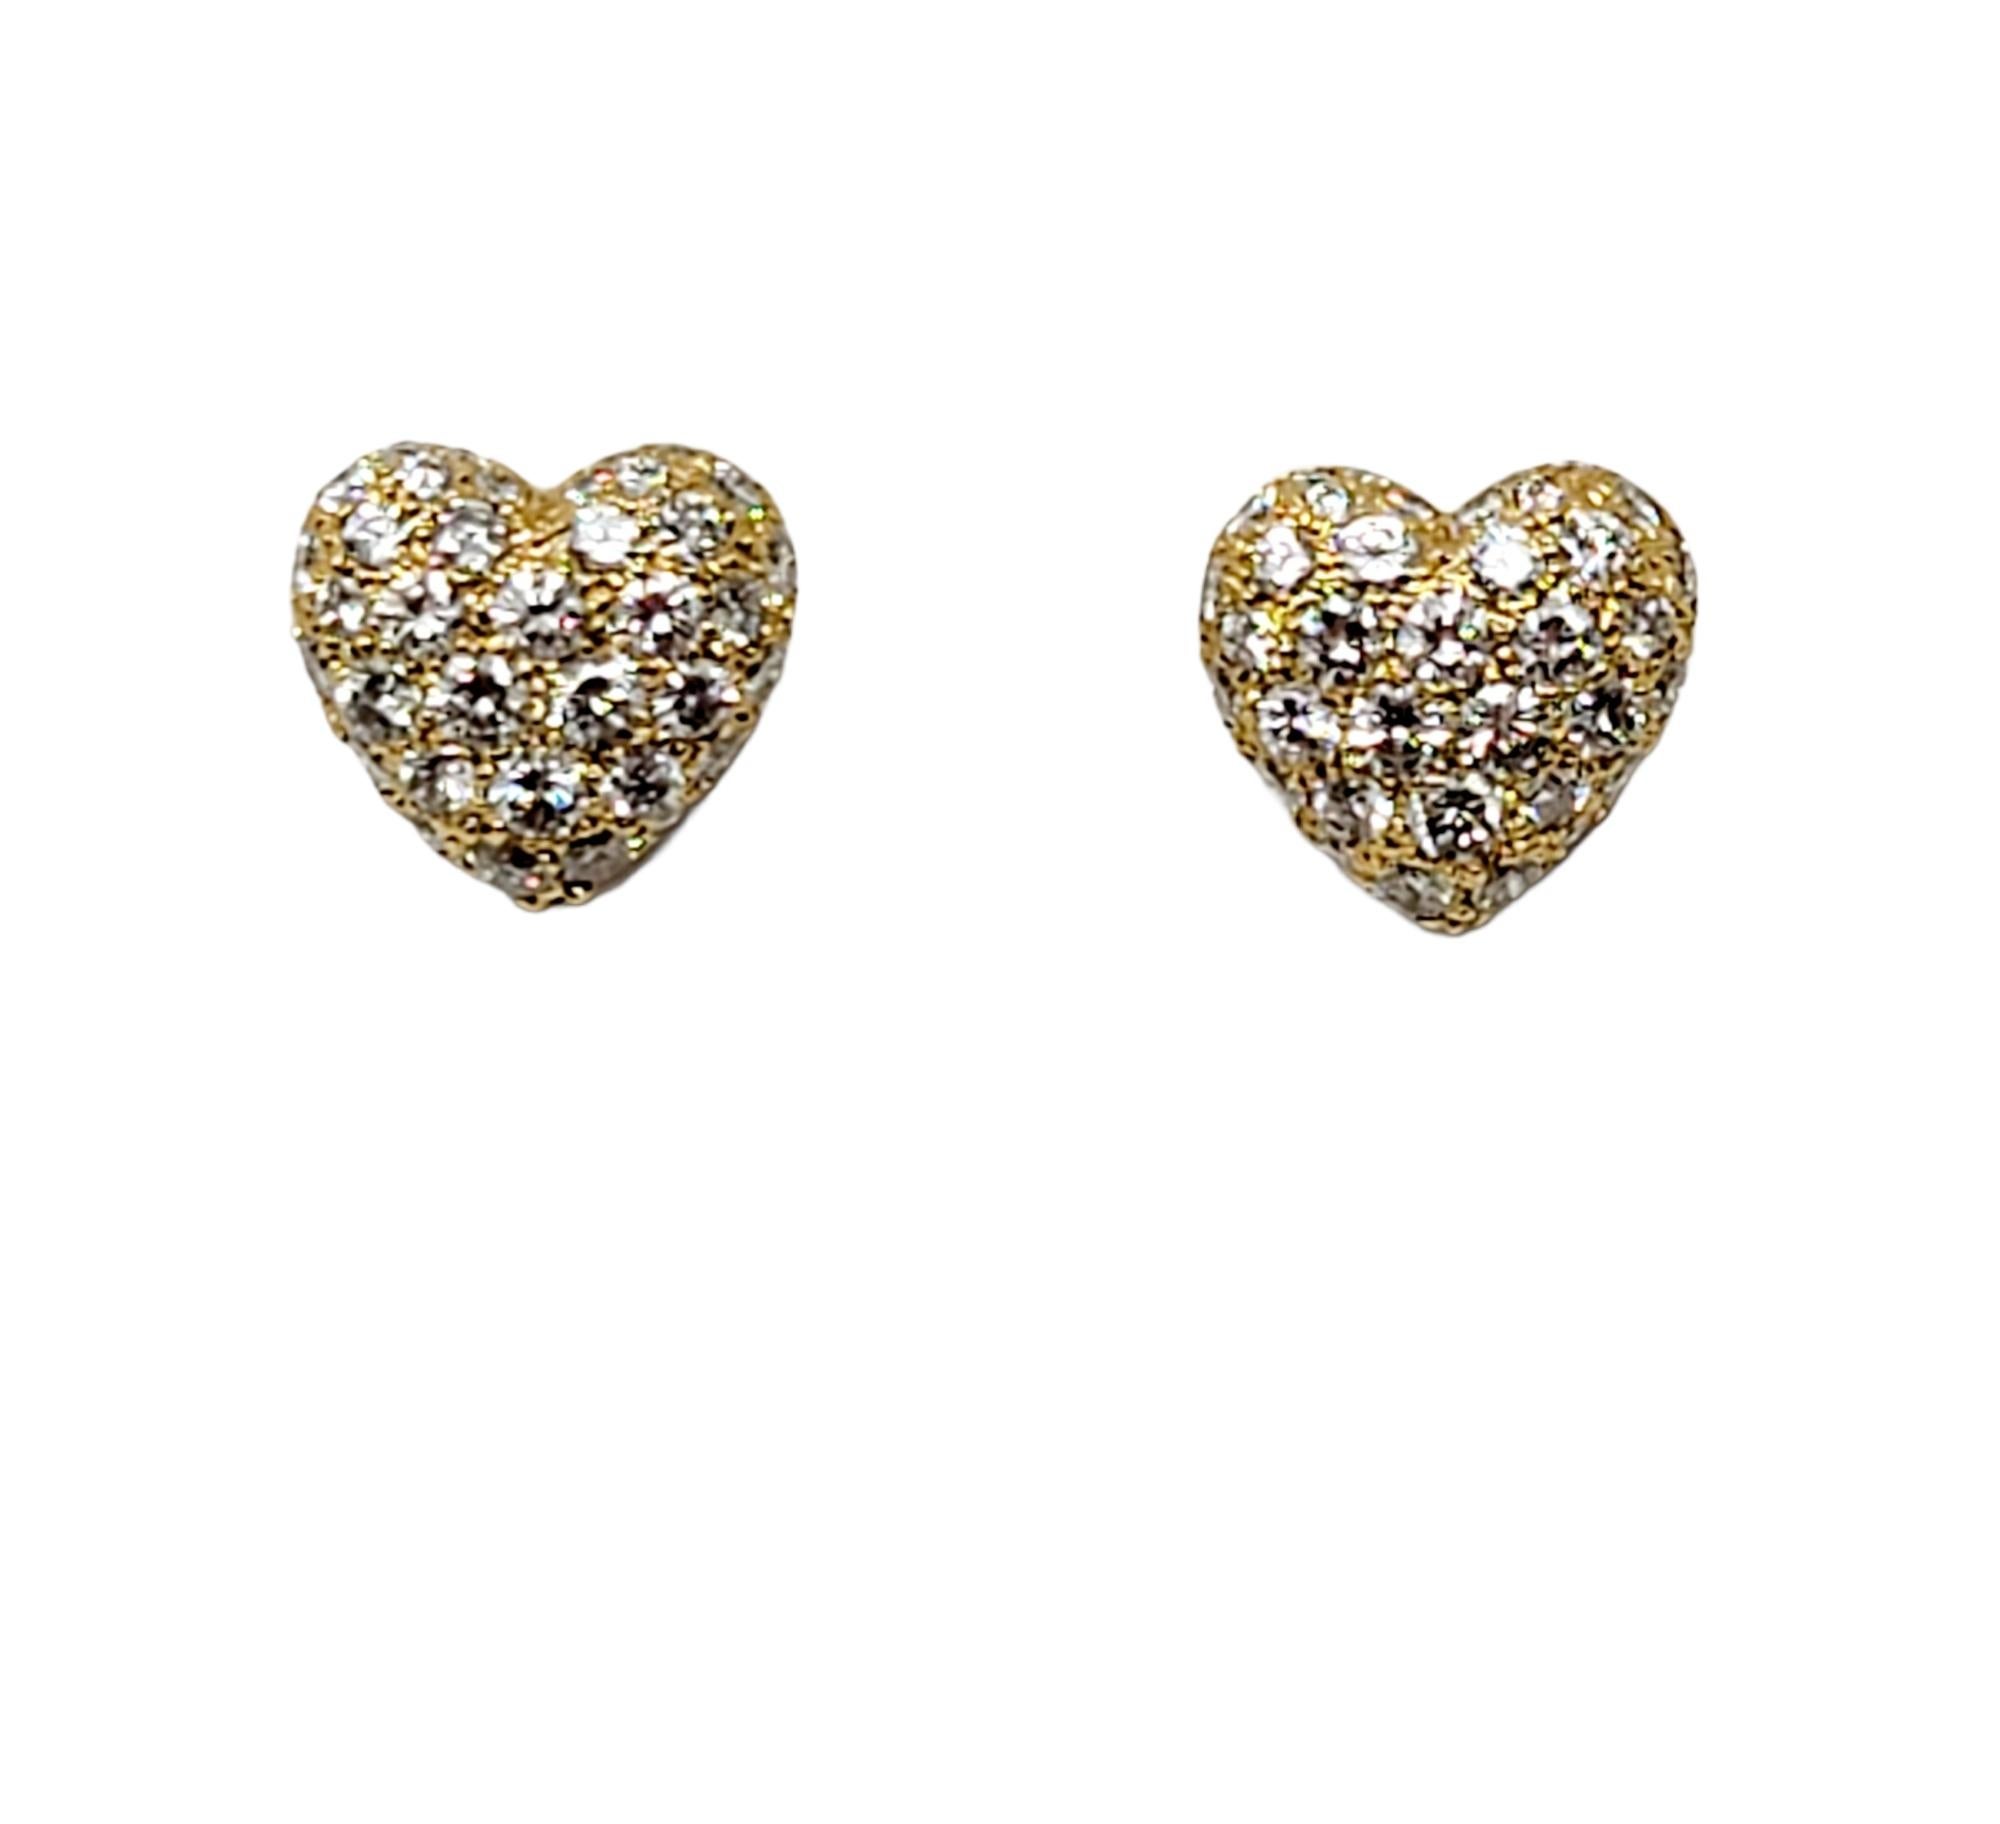 Stunningly sparkly pave diamond heart earrings from Cartier. These romantic and feminine earrings are bursting with glittering diamonds, really filling the lobe with icy white brilliance. They feature 72 shimmering round brilliant pave diamonds, F-G